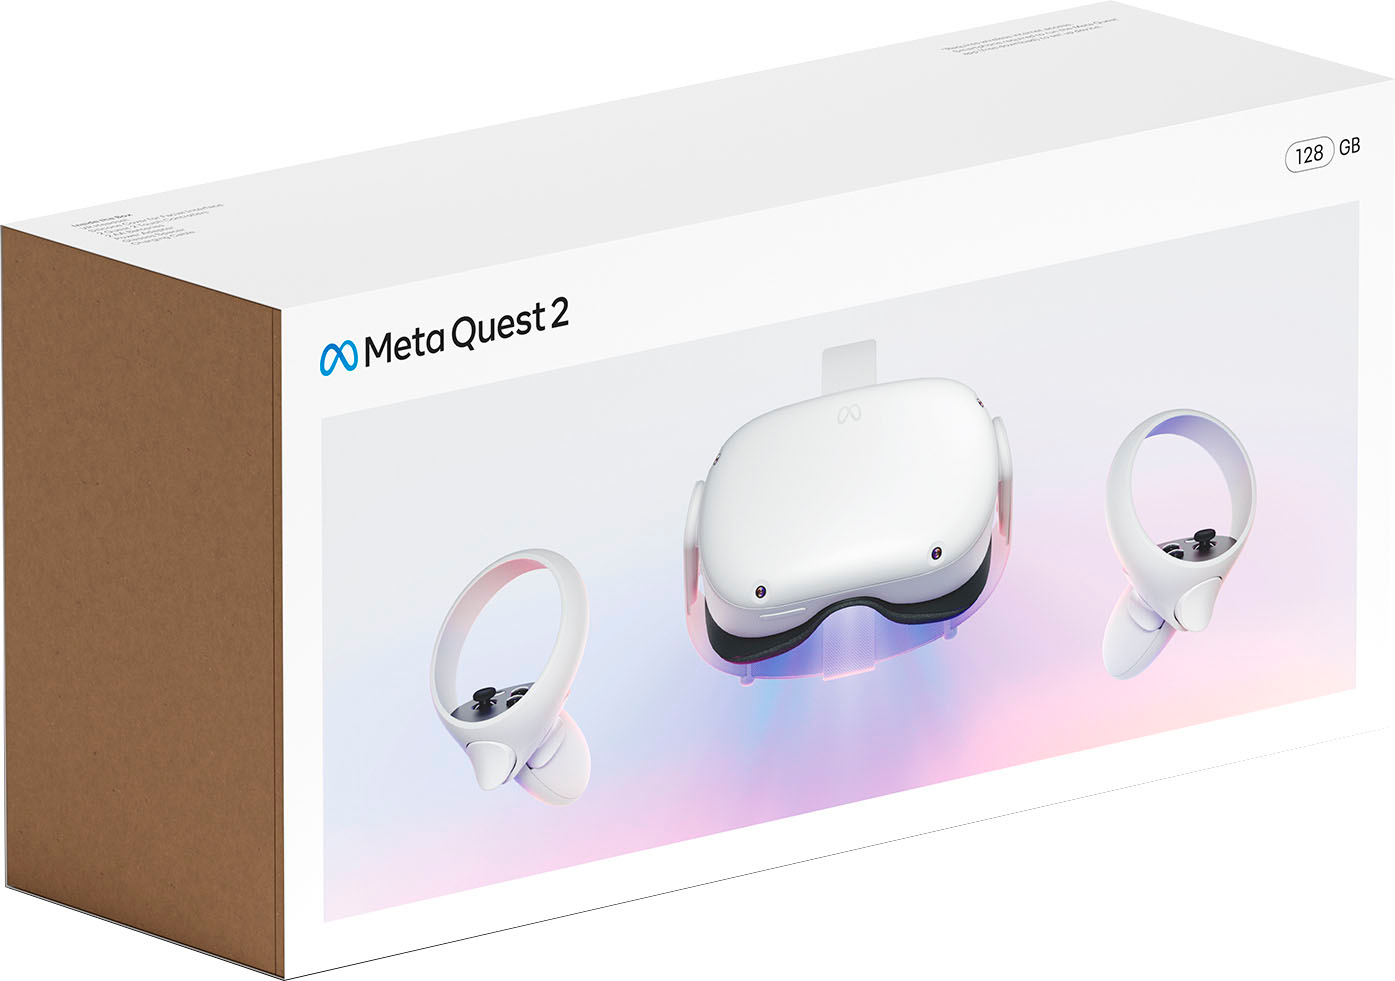 PC/タブレット PC周辺機器 Meta Quest 2 Advanced All-In-One Virtual Reality Headset 128GB 899 